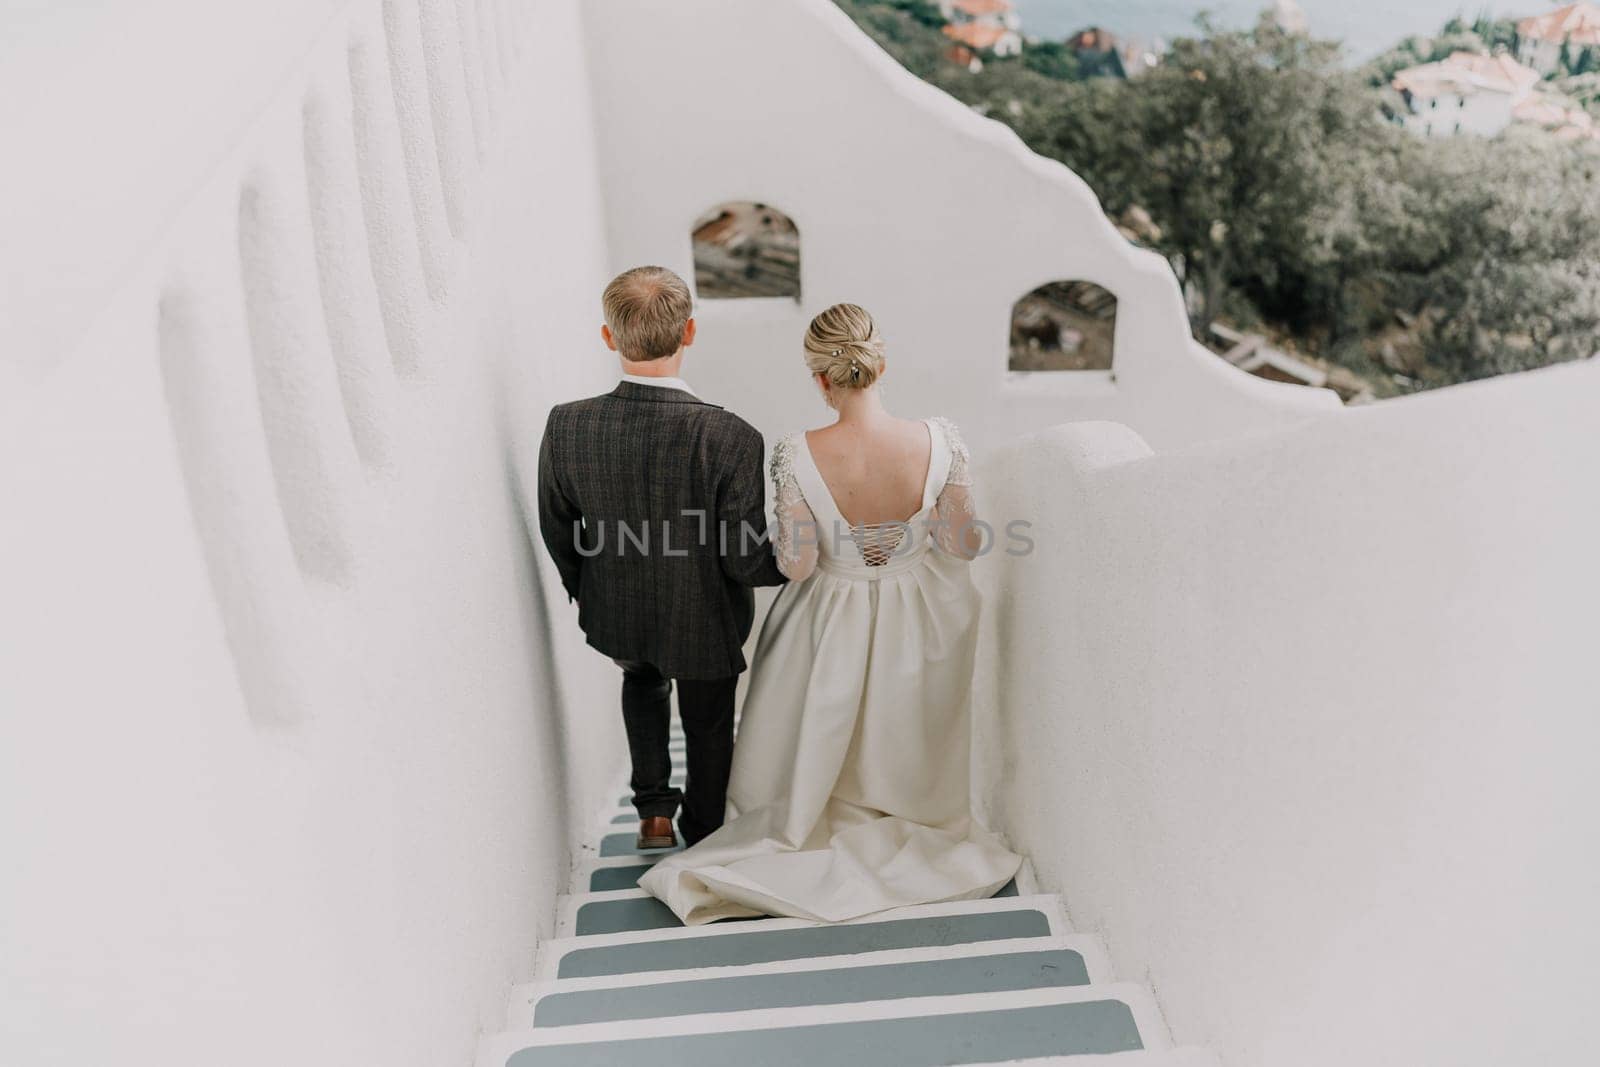 A bride and groom are walking down a white staircase. The bride is wearing a white dress and the groom is wearing a suit